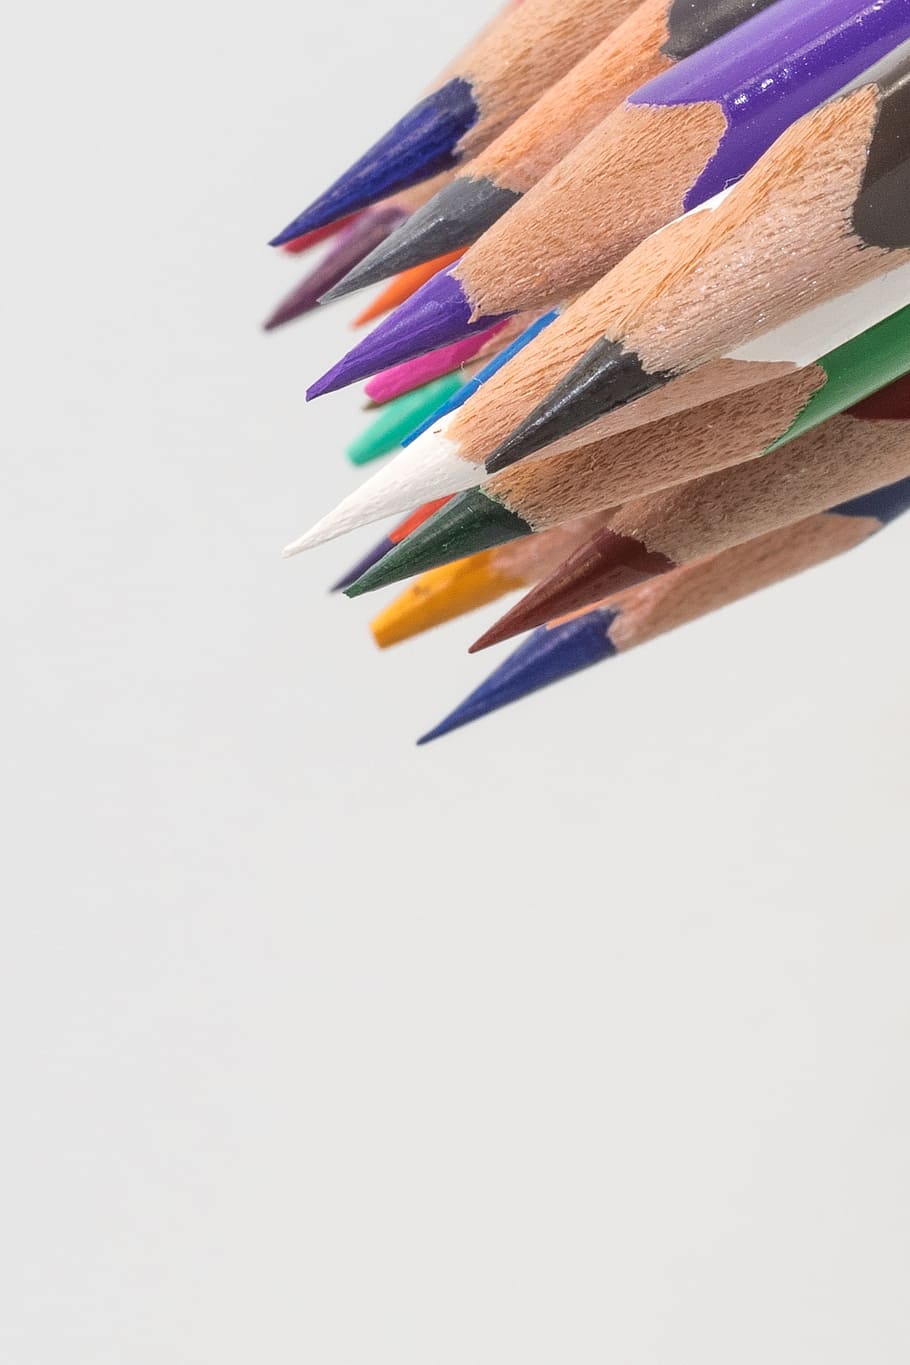 assorted-color pencils on white background, colored pencils, wooden pegs, HD wallpaper